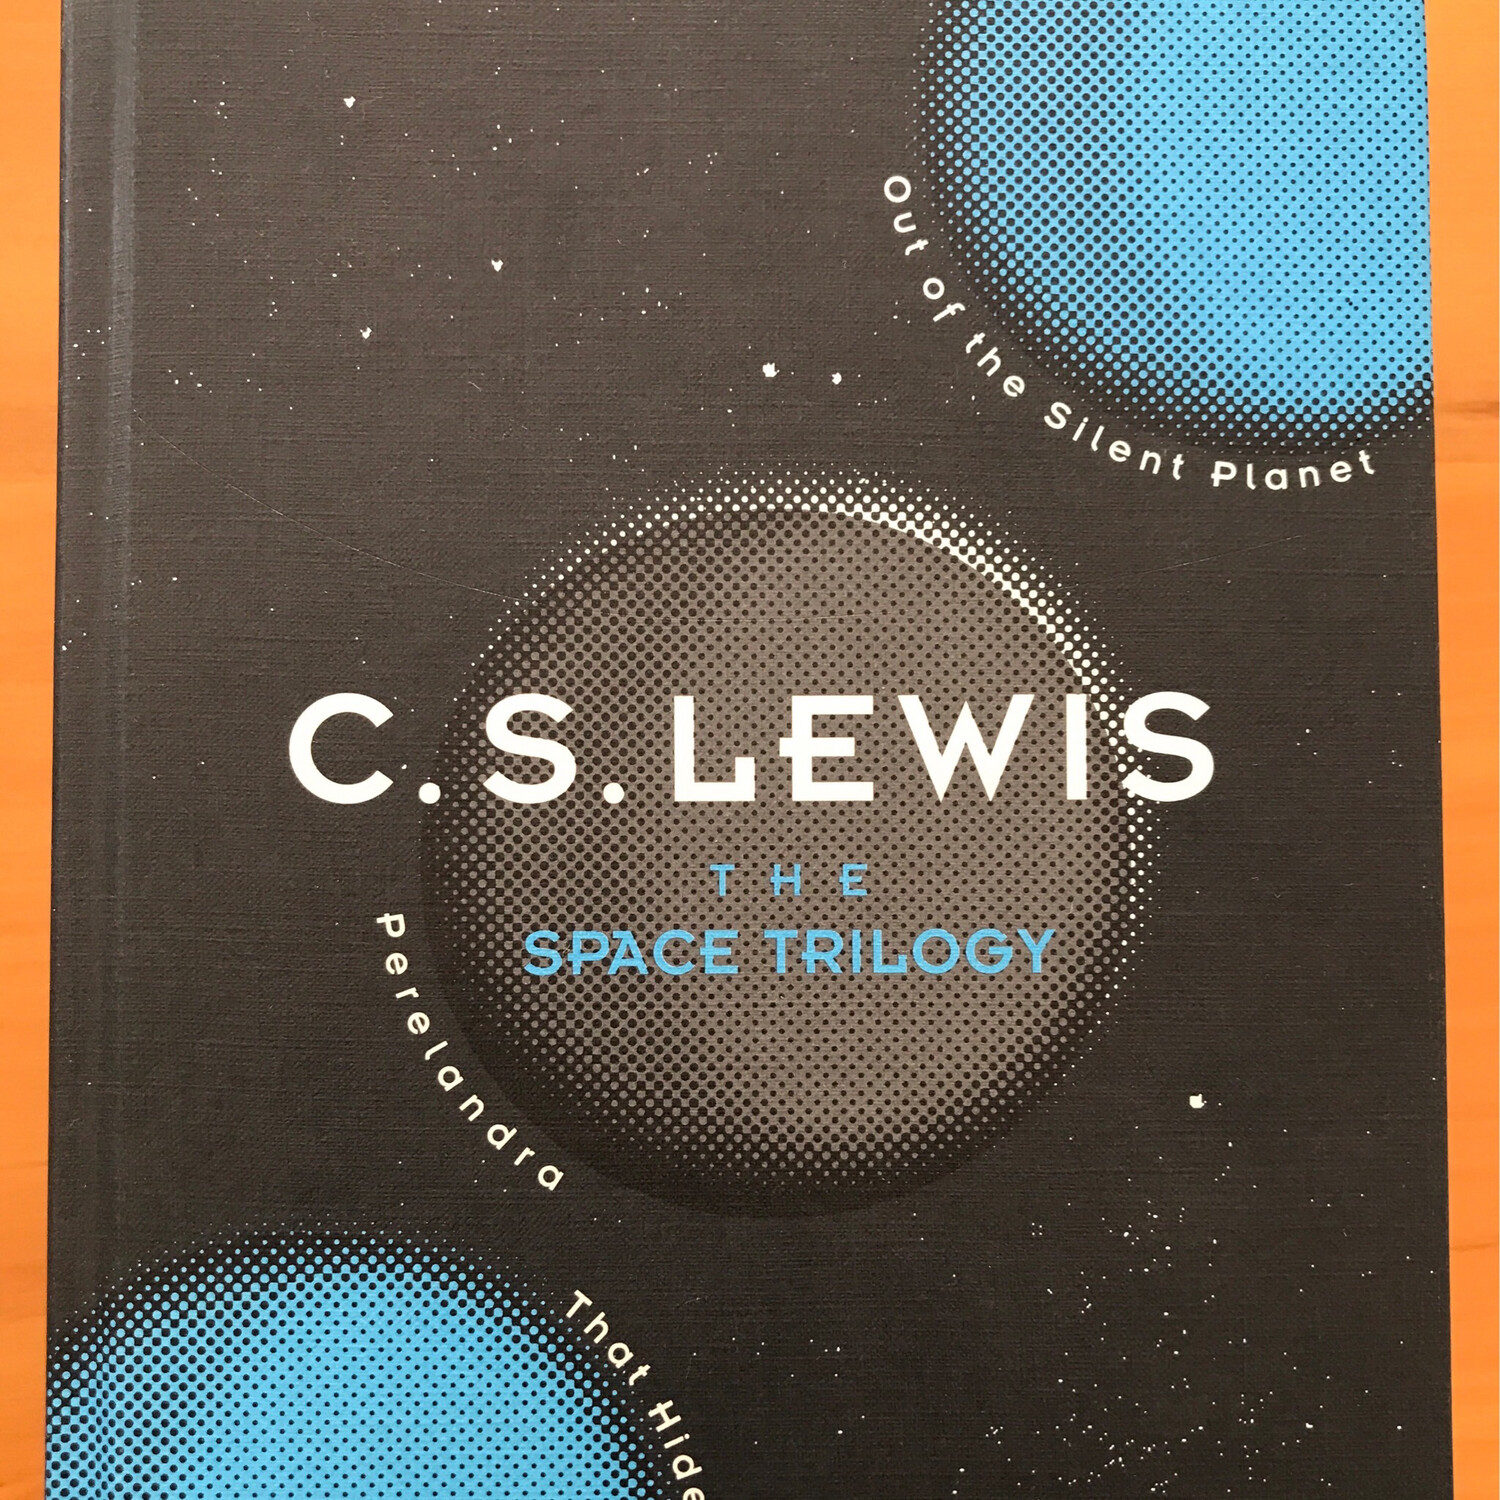 The Space Trilogy, C. S. Lewis